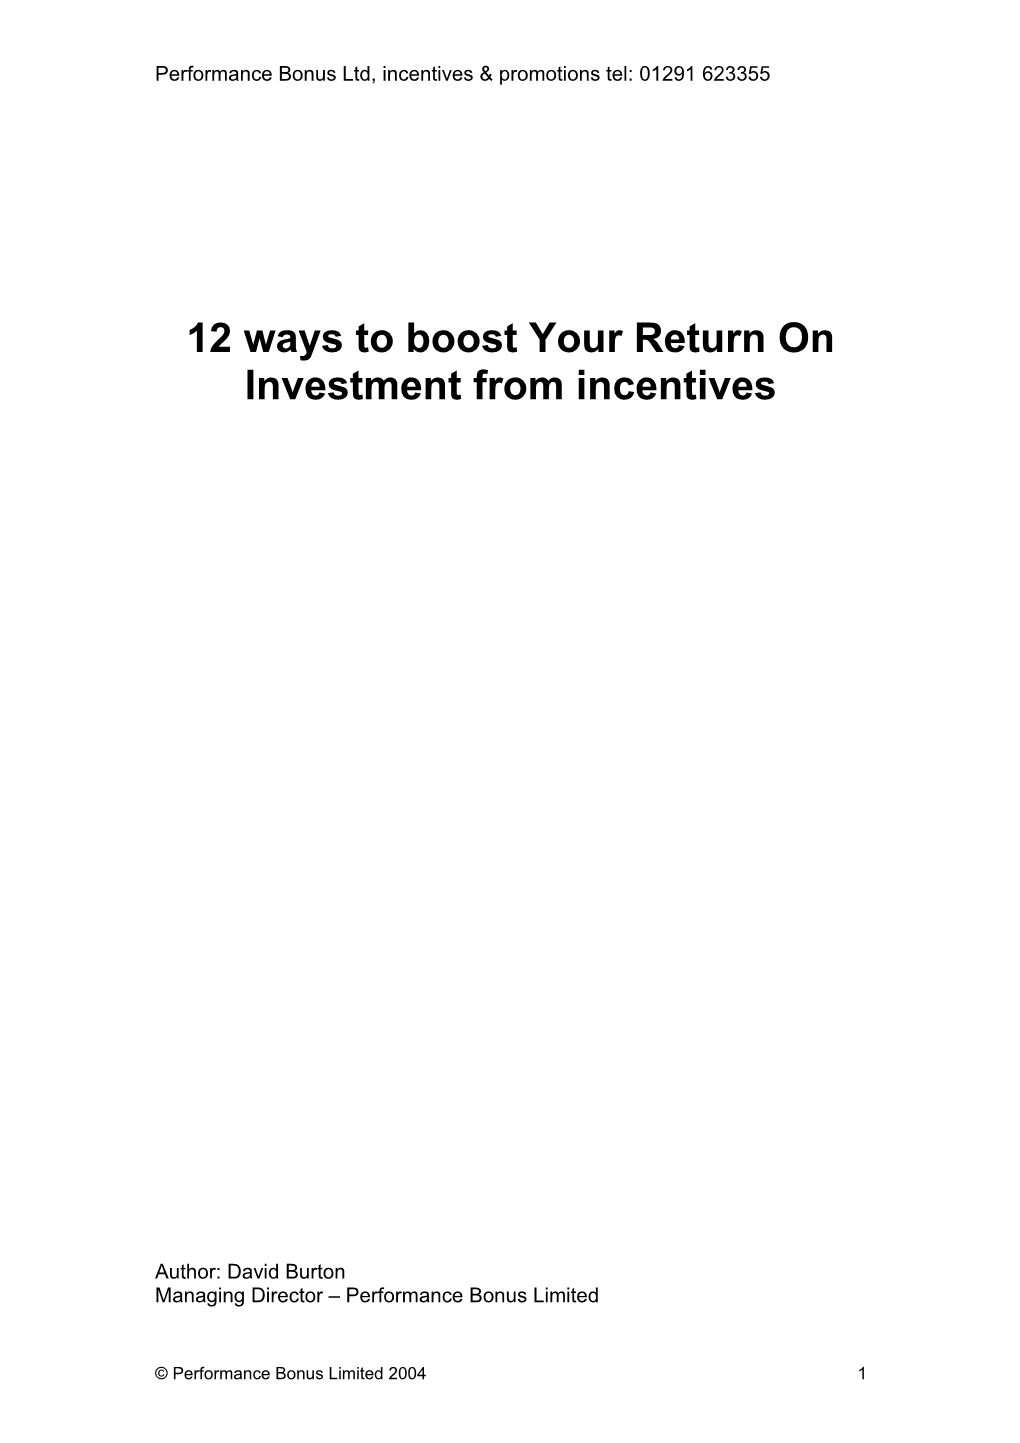 12 Ways to Boost Return on Investment from Incentives